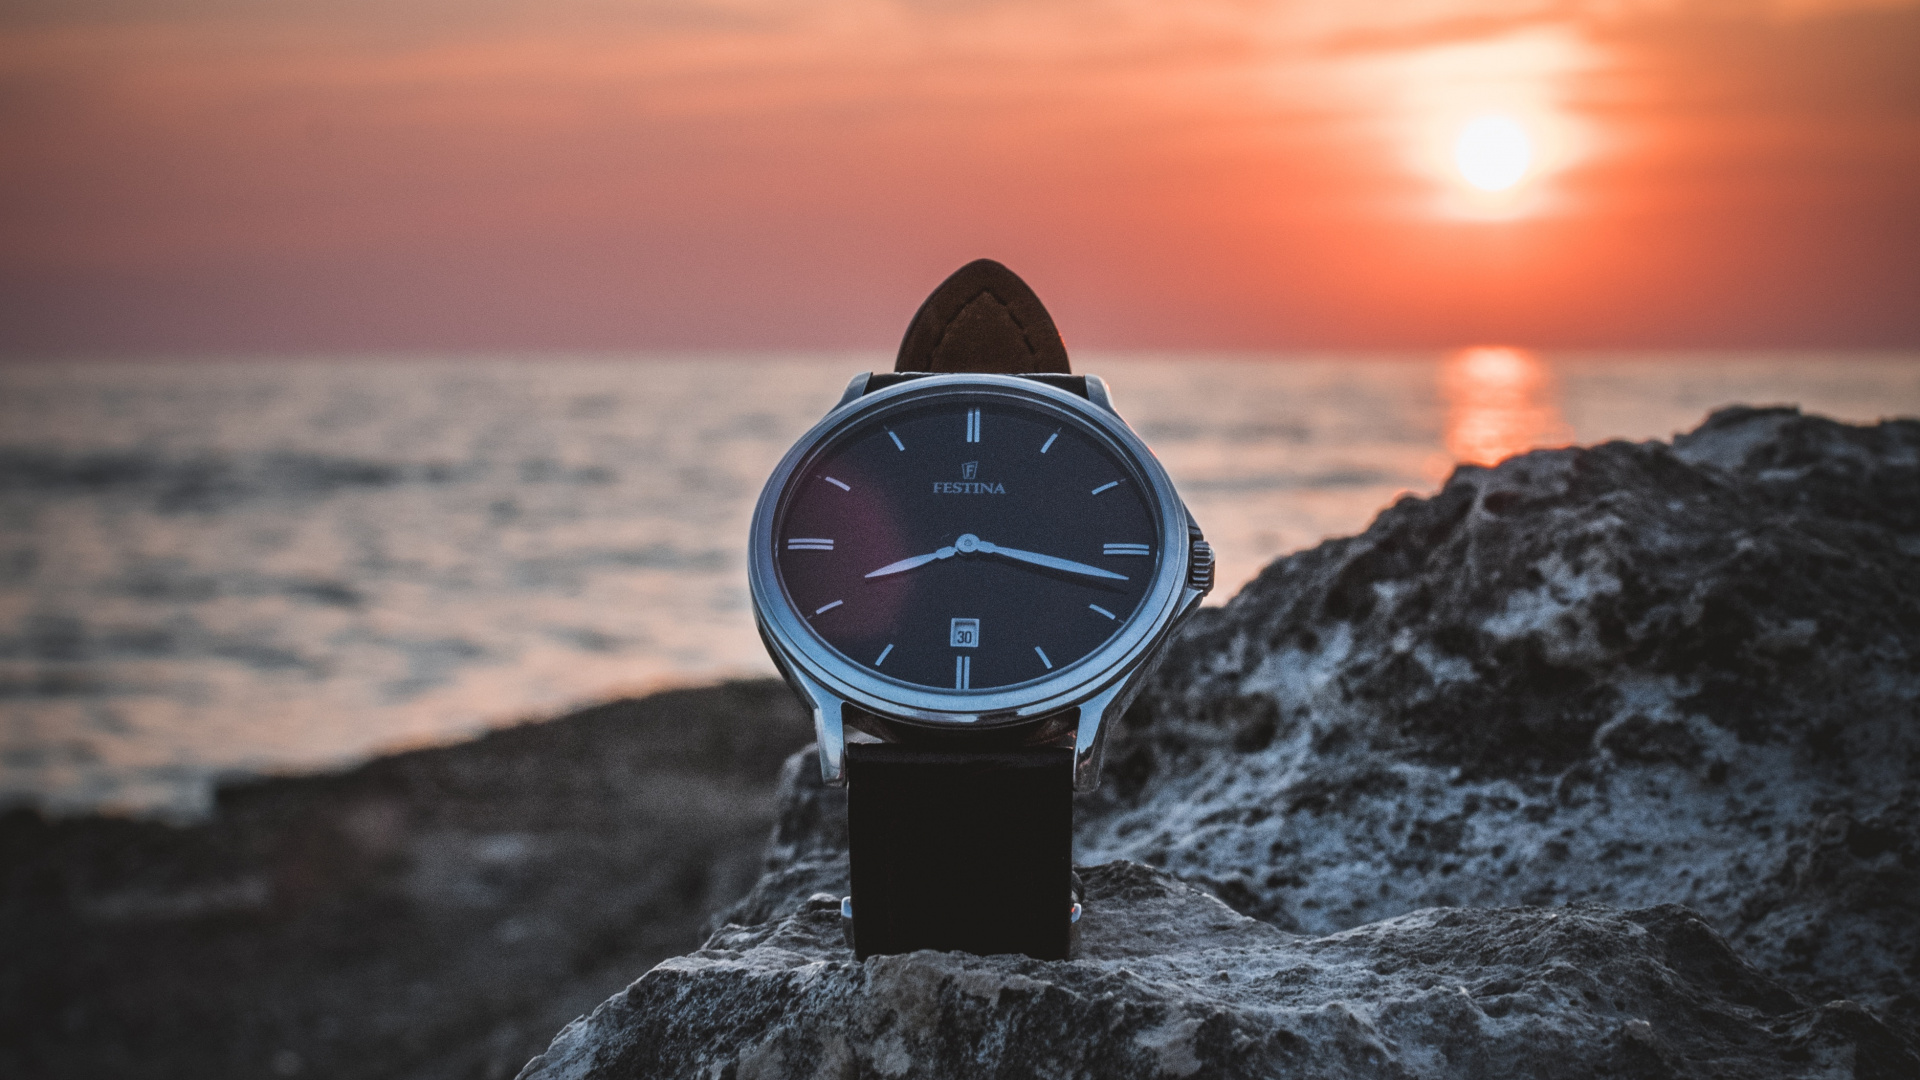 Black and White Analog Watch on Gray Rock Near Sea During Sunset. Wallpaper in 1920x1080 Resolution